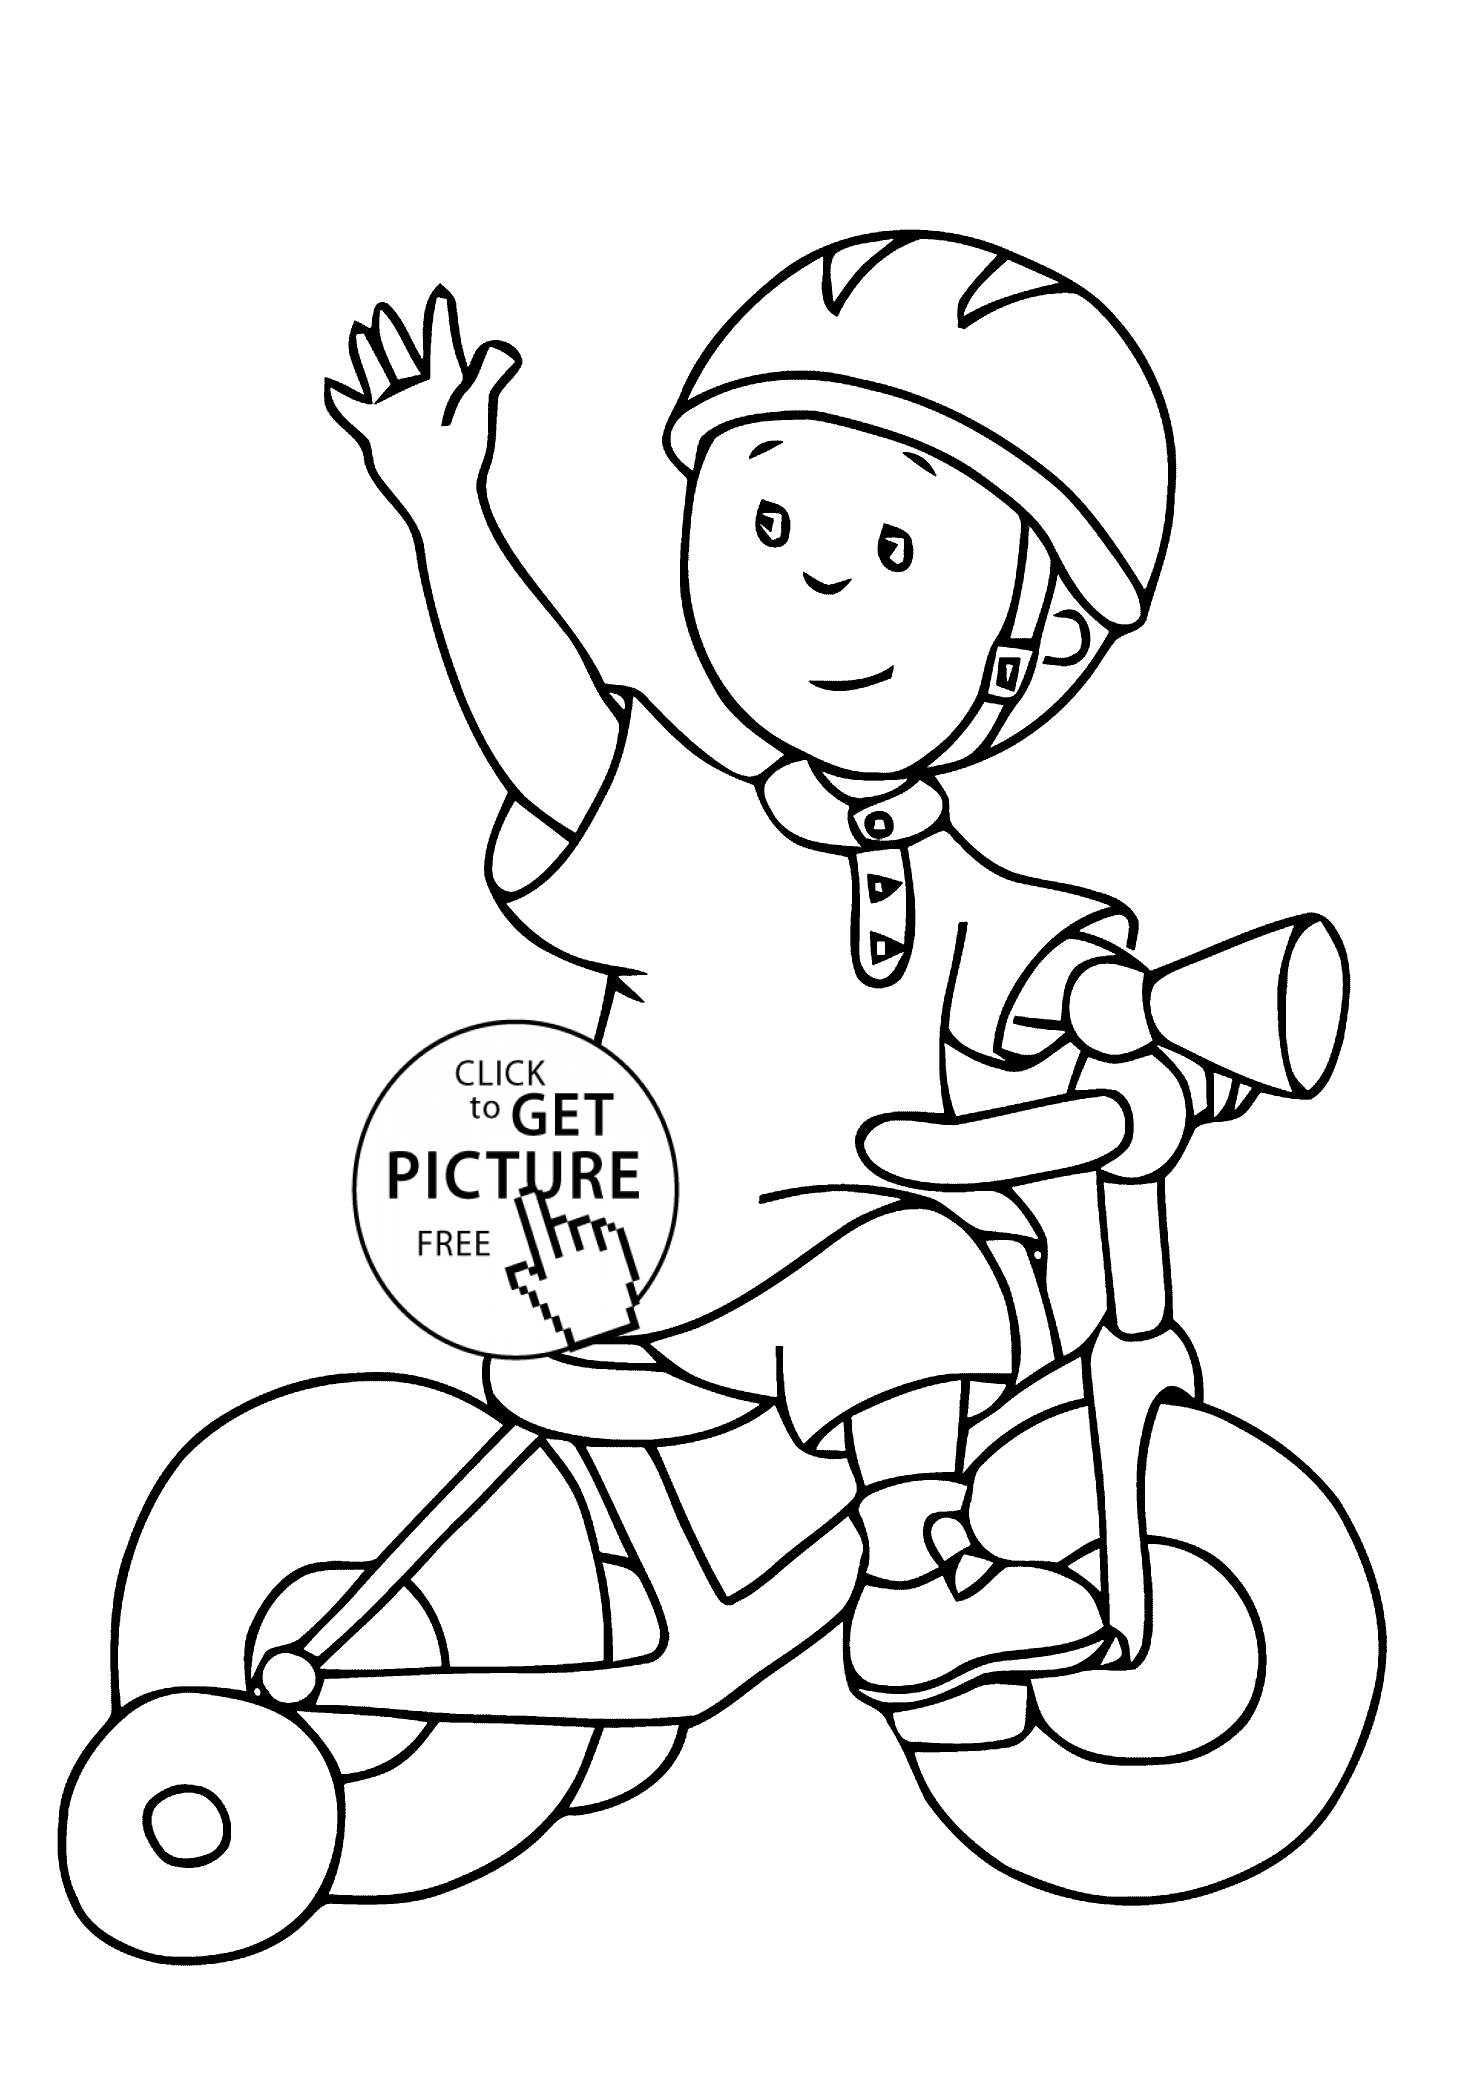 free coloring pages for teenagers jungle coloring pages best coloring pages for kids coloring for free pages teenagers 